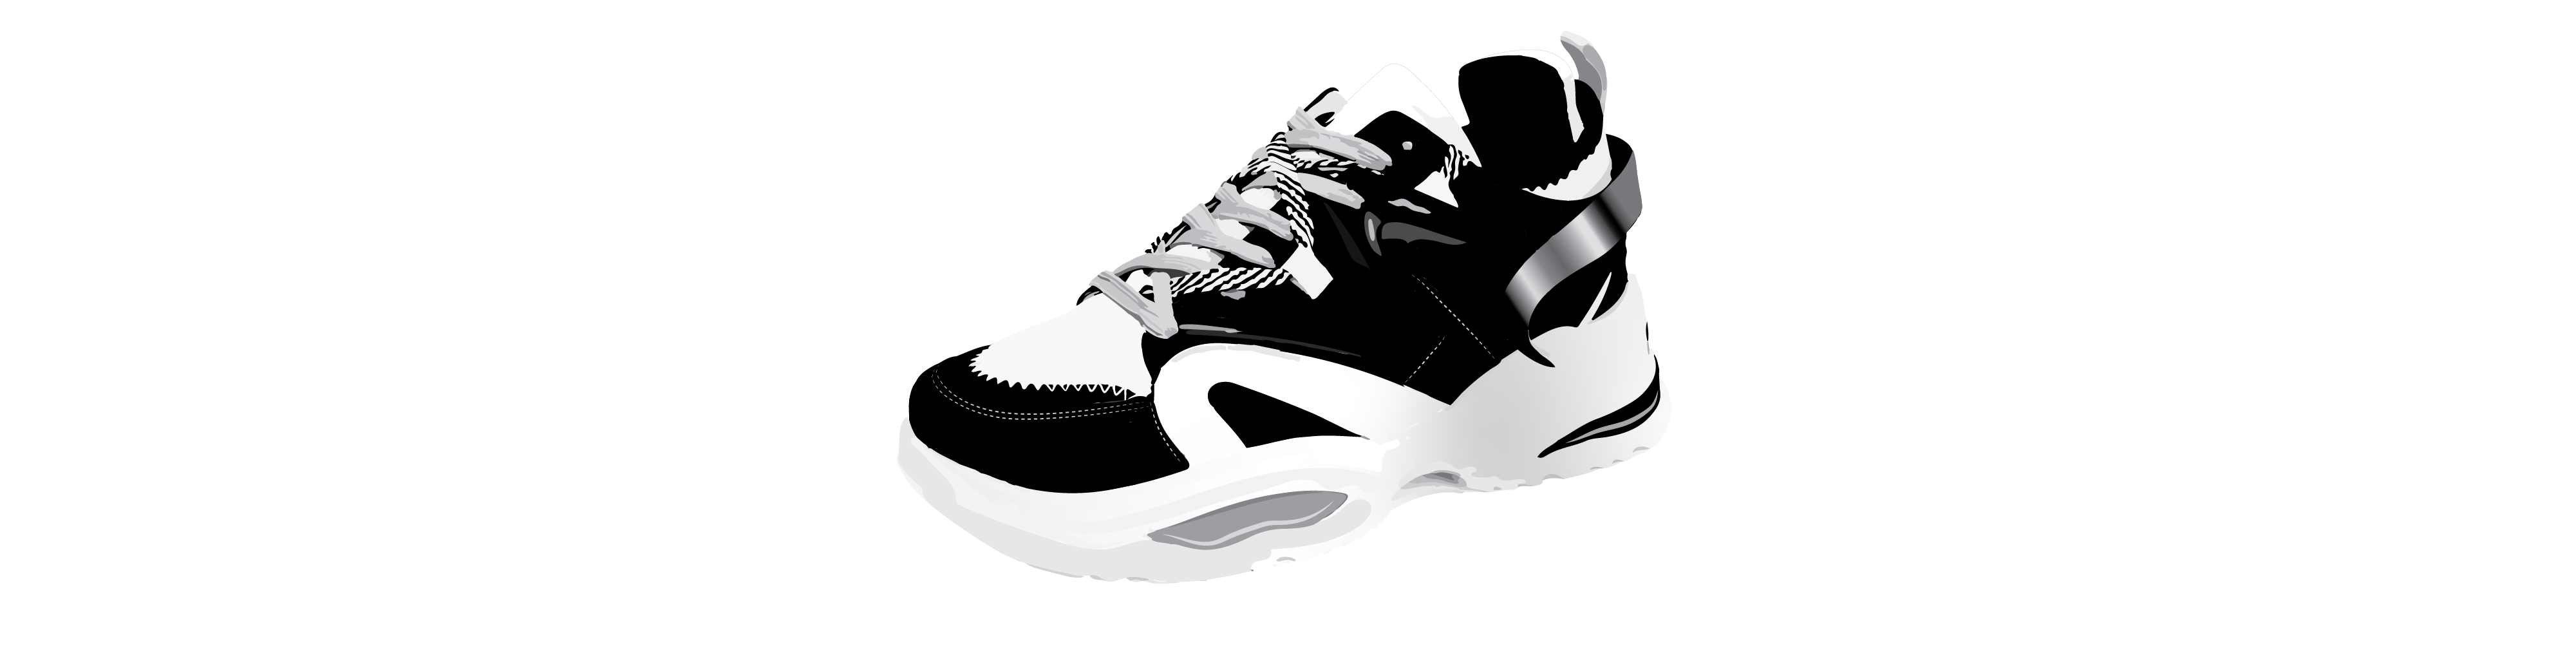 Running shoe with black and white detailing and grey shoelaces.